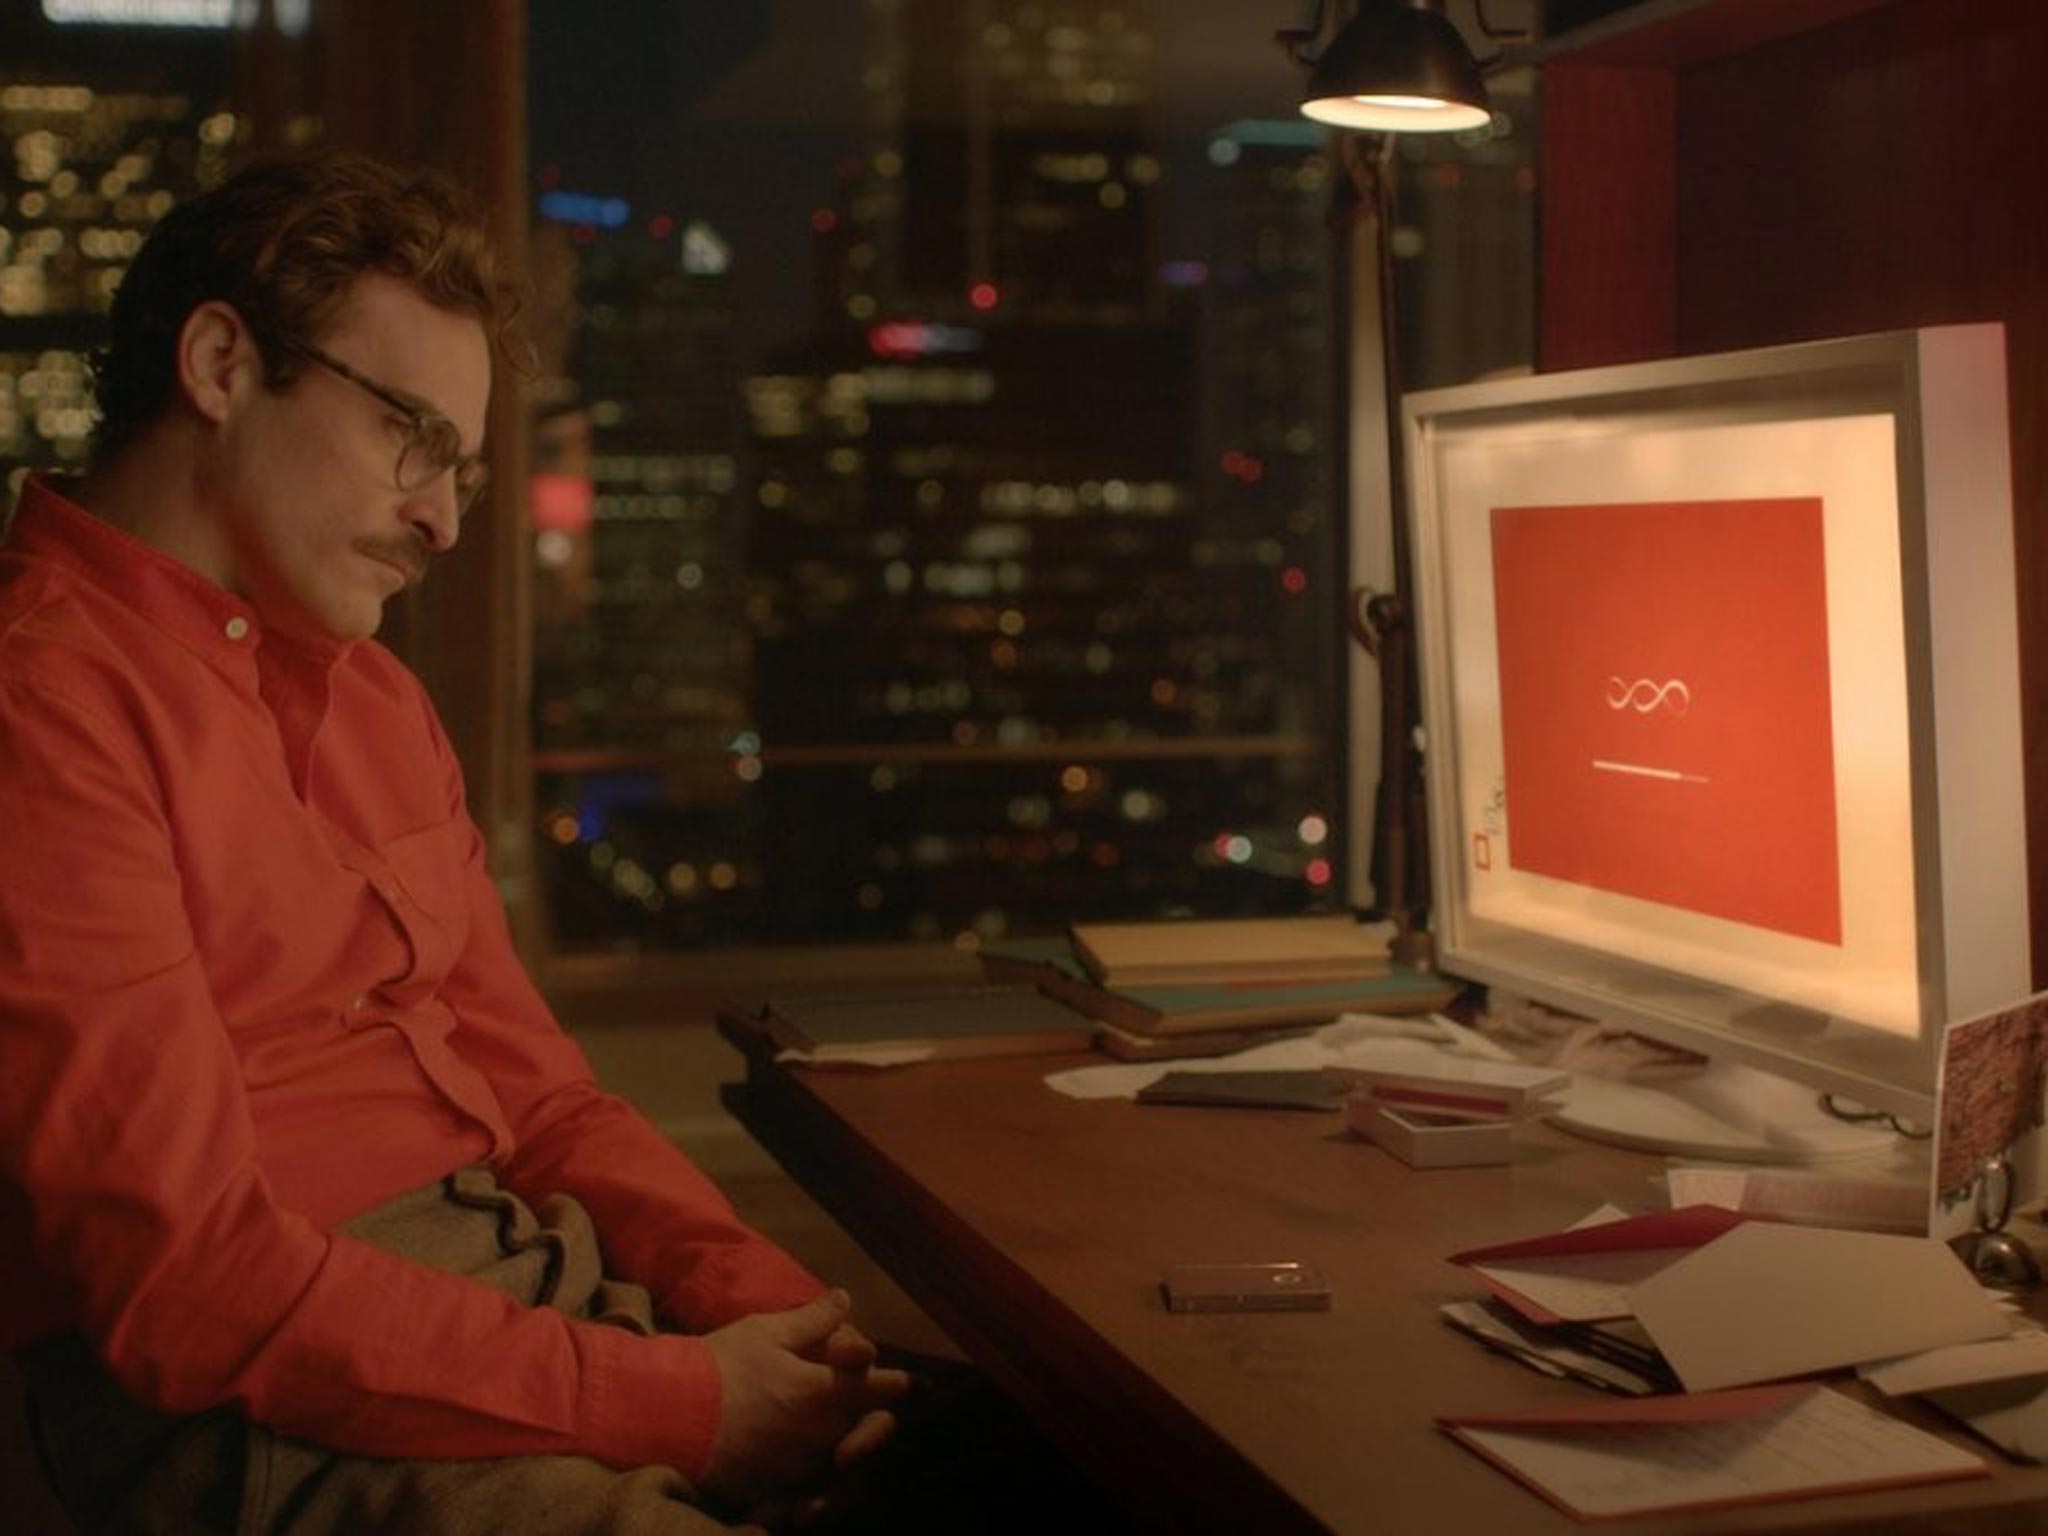 Office romance: Joaquin Phoenix as Theodore Twombly, who falls in love with a computer, in ‘Her’